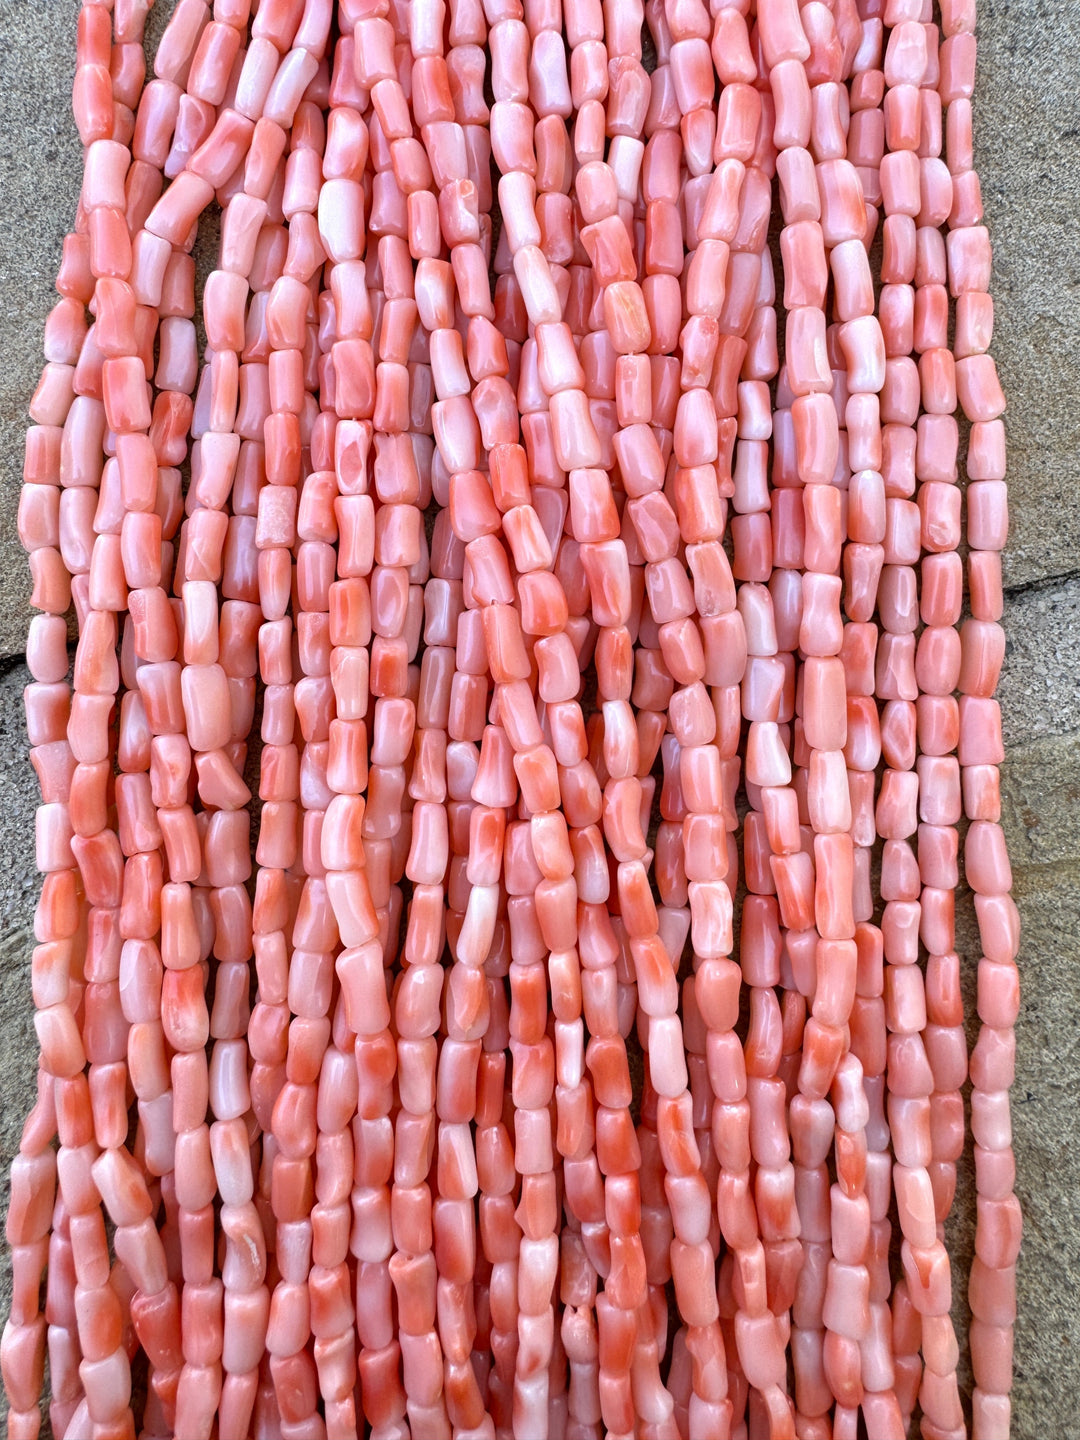 100% Natural High Quality Pink Coral (Taiwan) 4-5mmx3-4mm